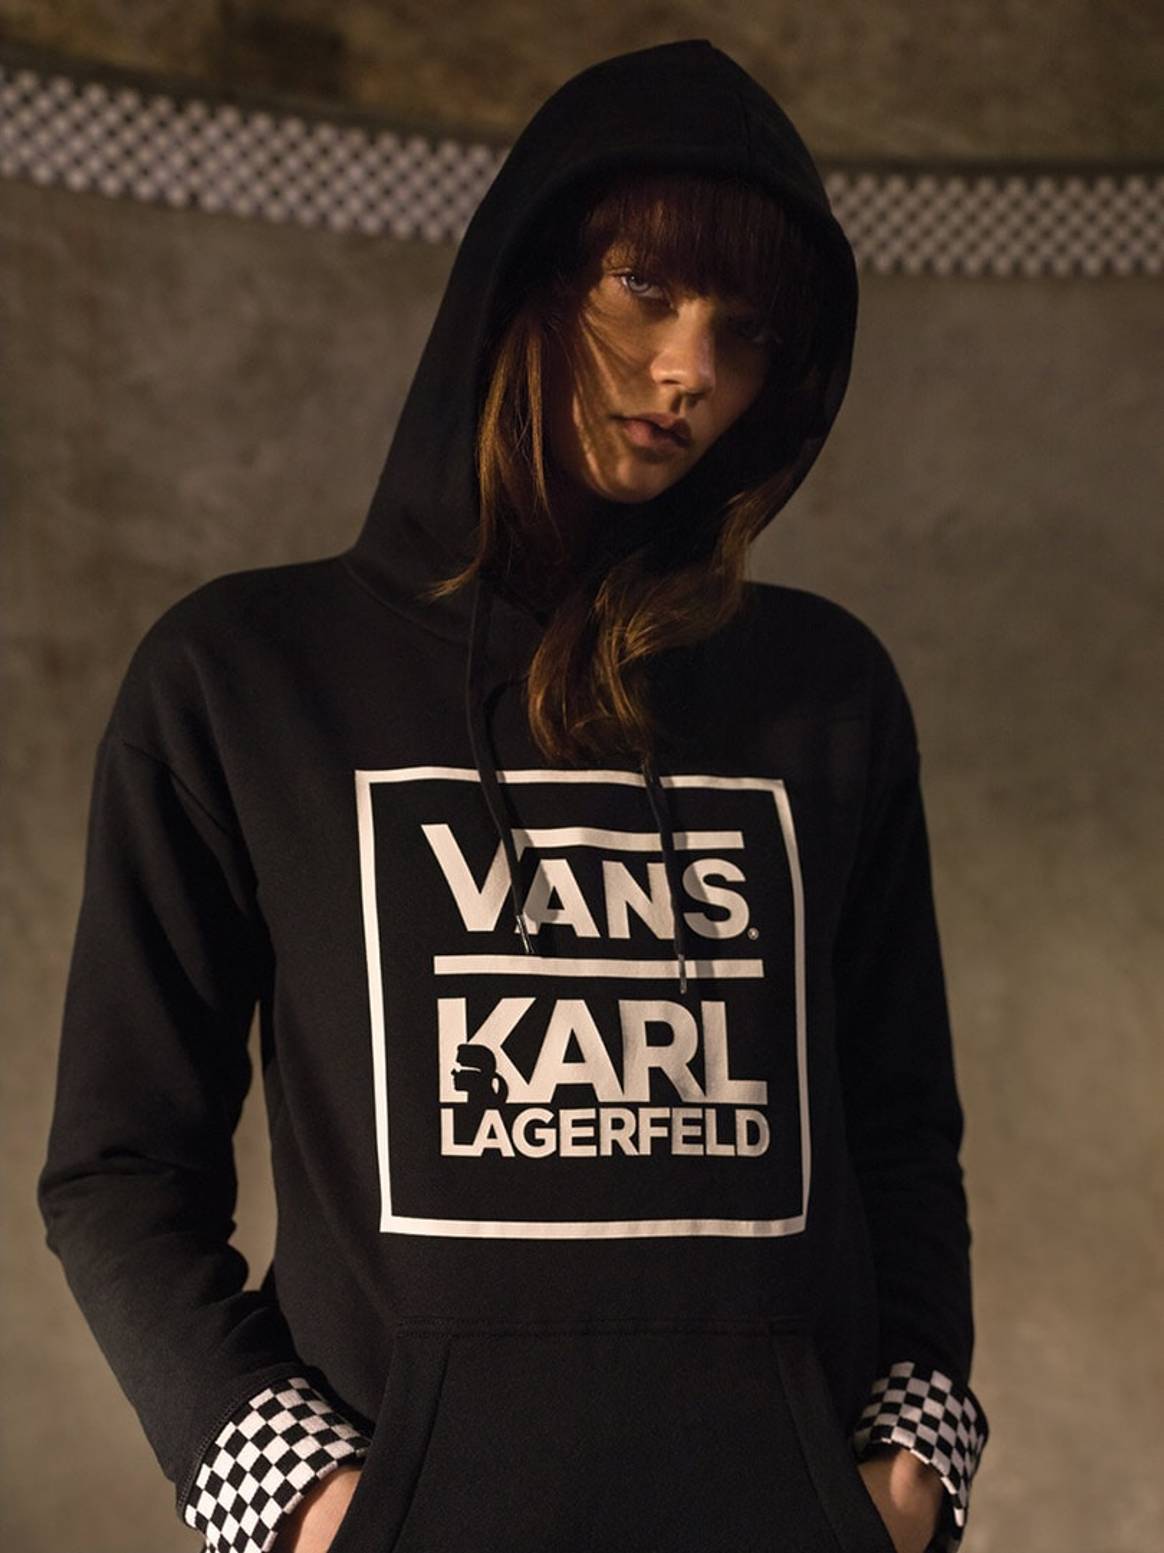 Vans collaborates with Karl Lagerfeld for Fall 2017